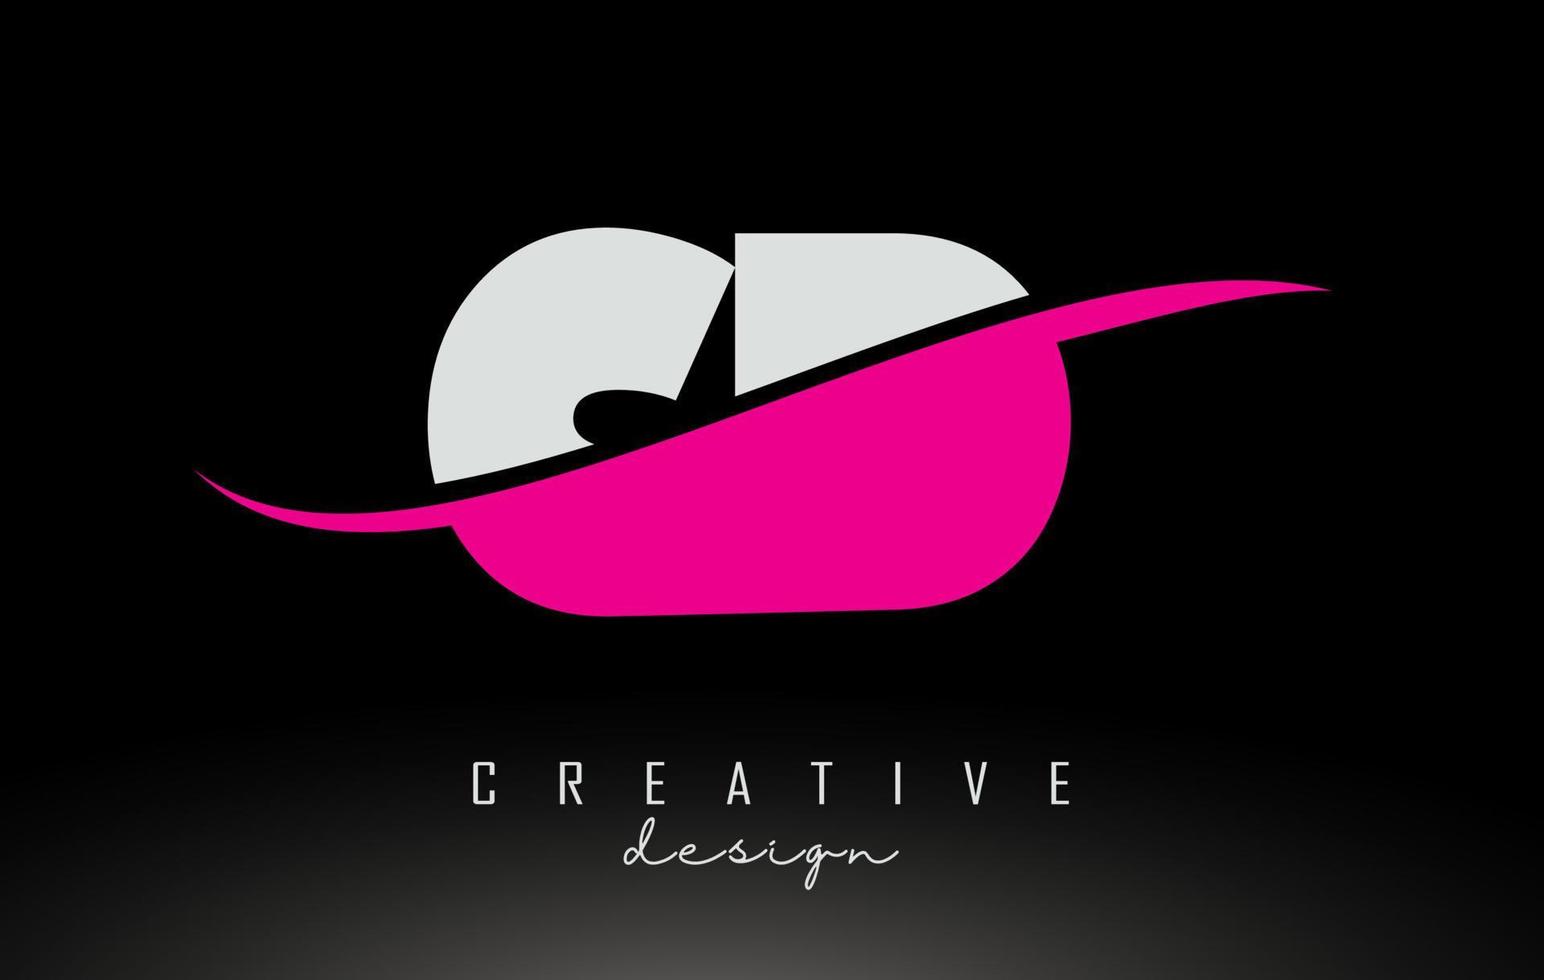 CD C D White andPinkYellow Letter Logo with Swoosh. vector